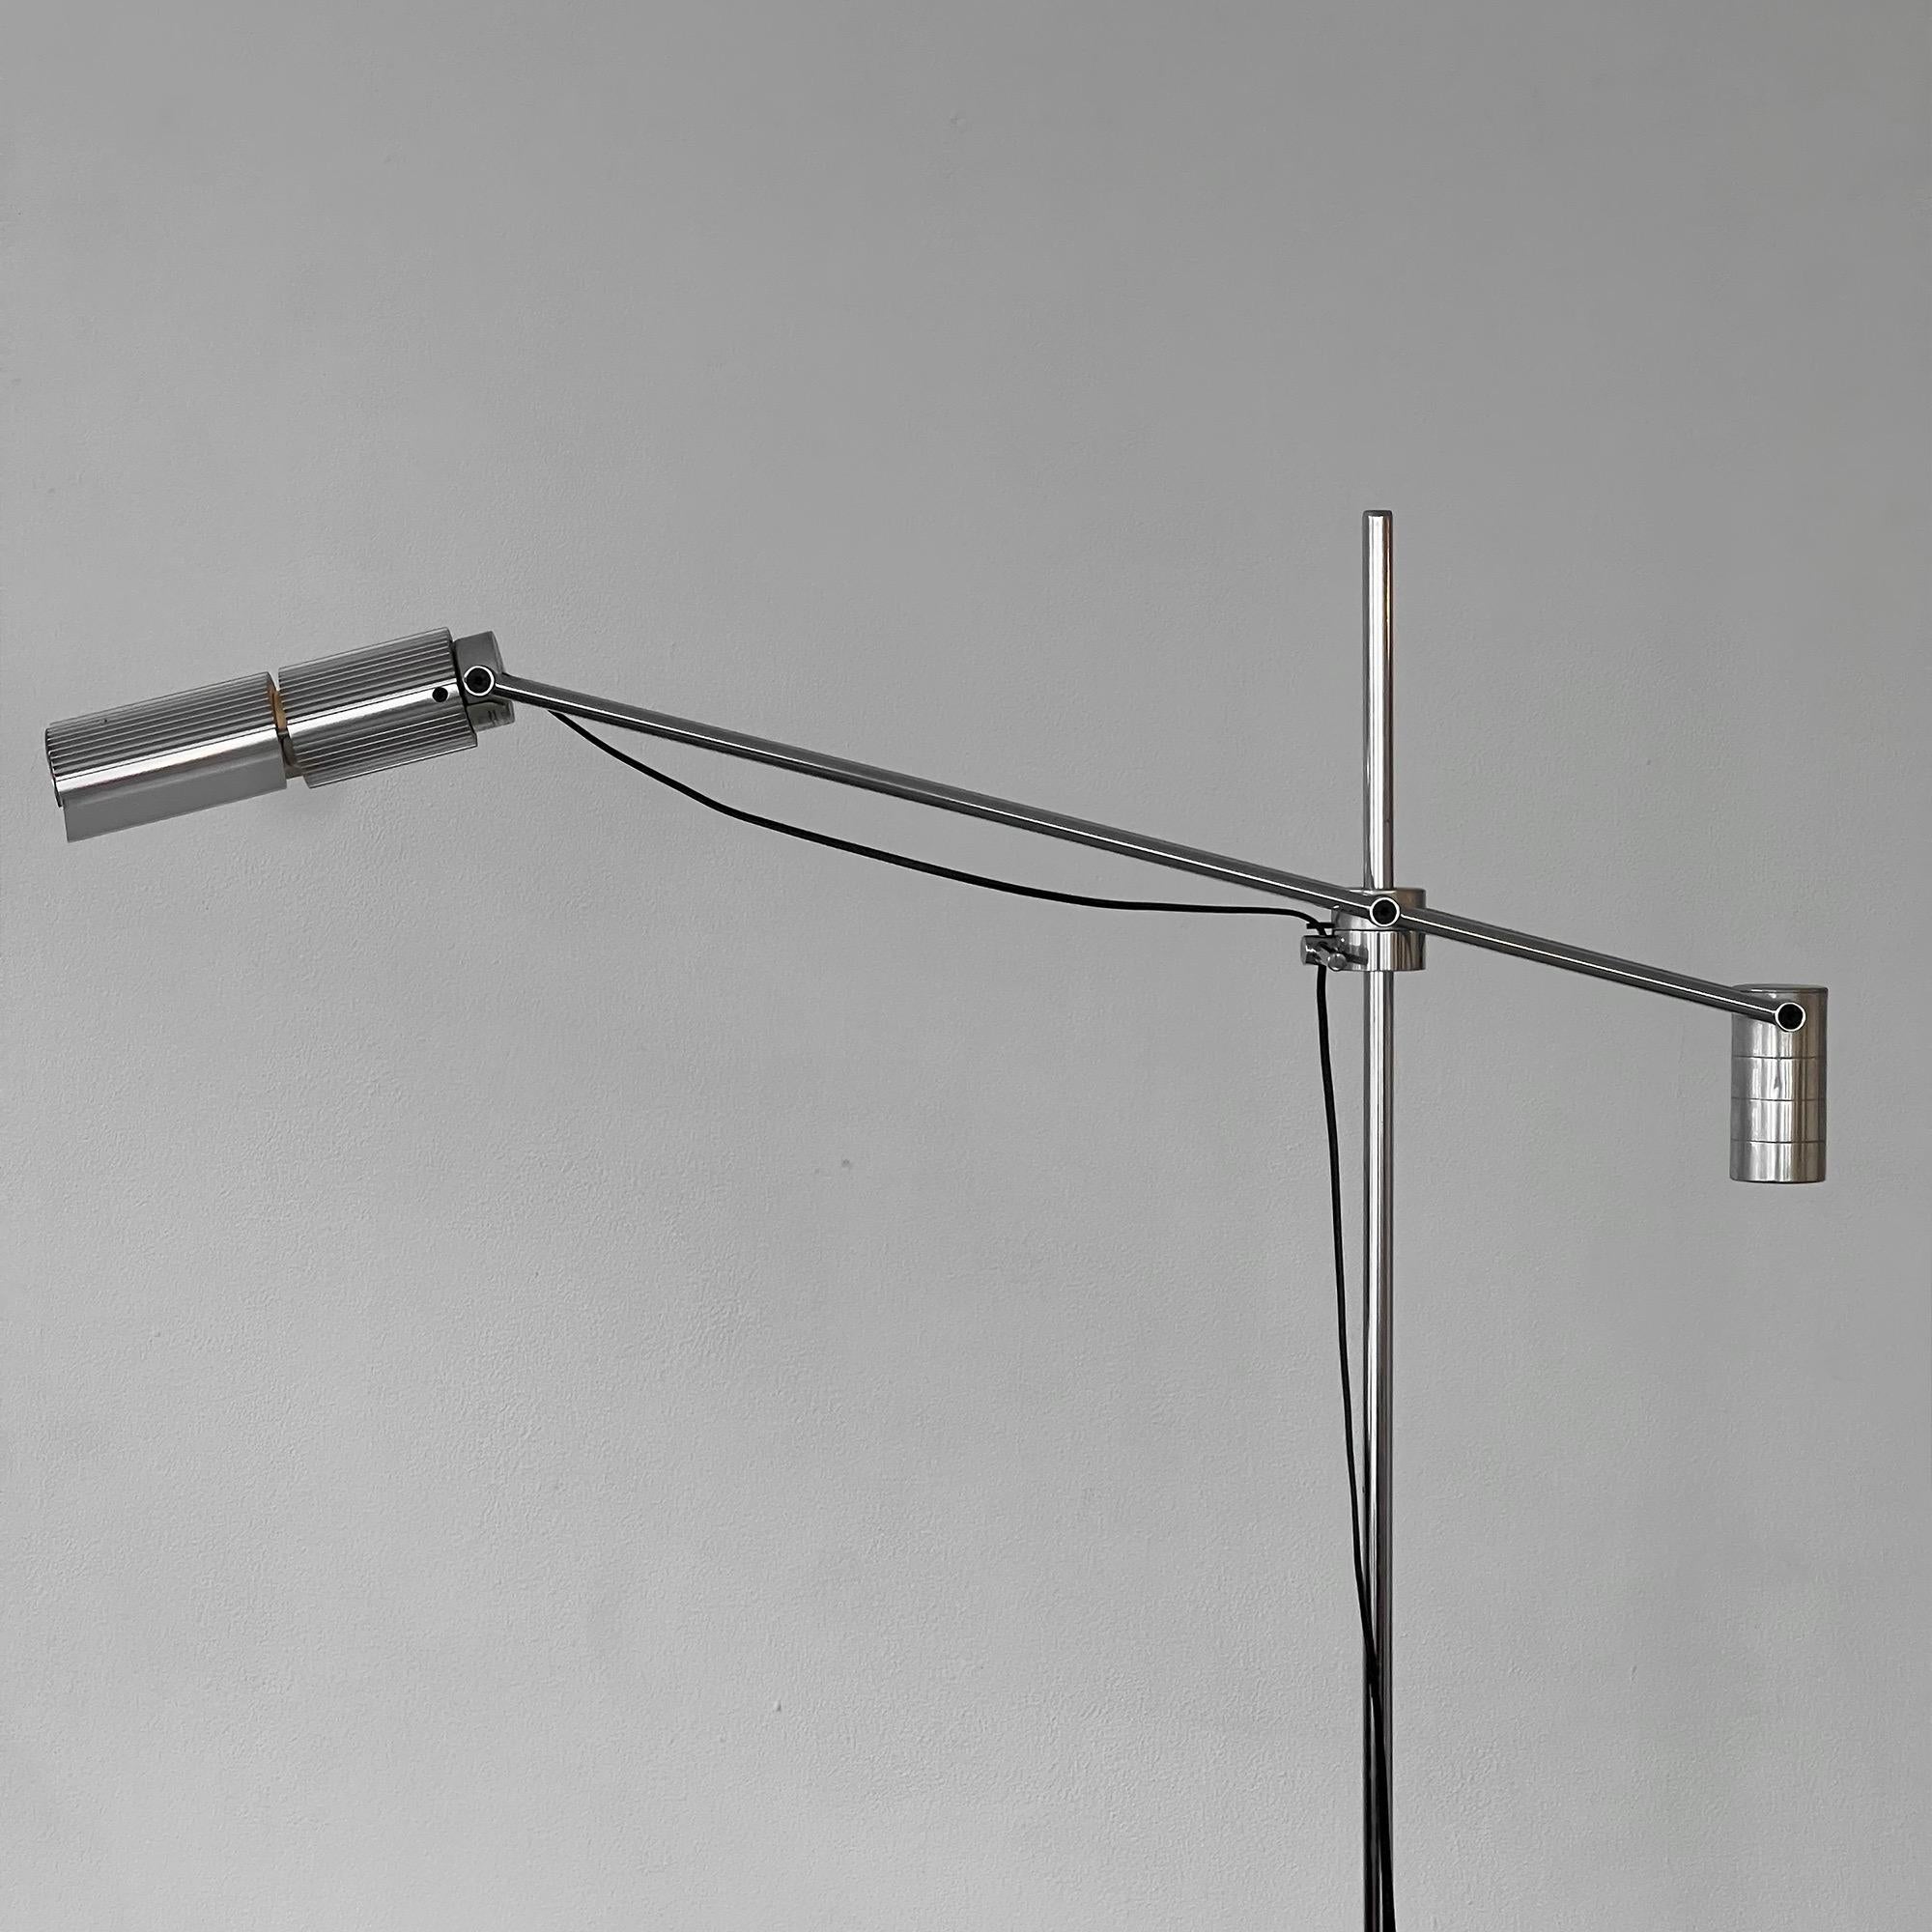 This floor lamp was designed by architect Viktor Frauenknecht for Swiss Lamps International. Founded in 1967, the company specializes in the design and manufacture of high-end lighting fixtures. The use of top-quality materials, combined with